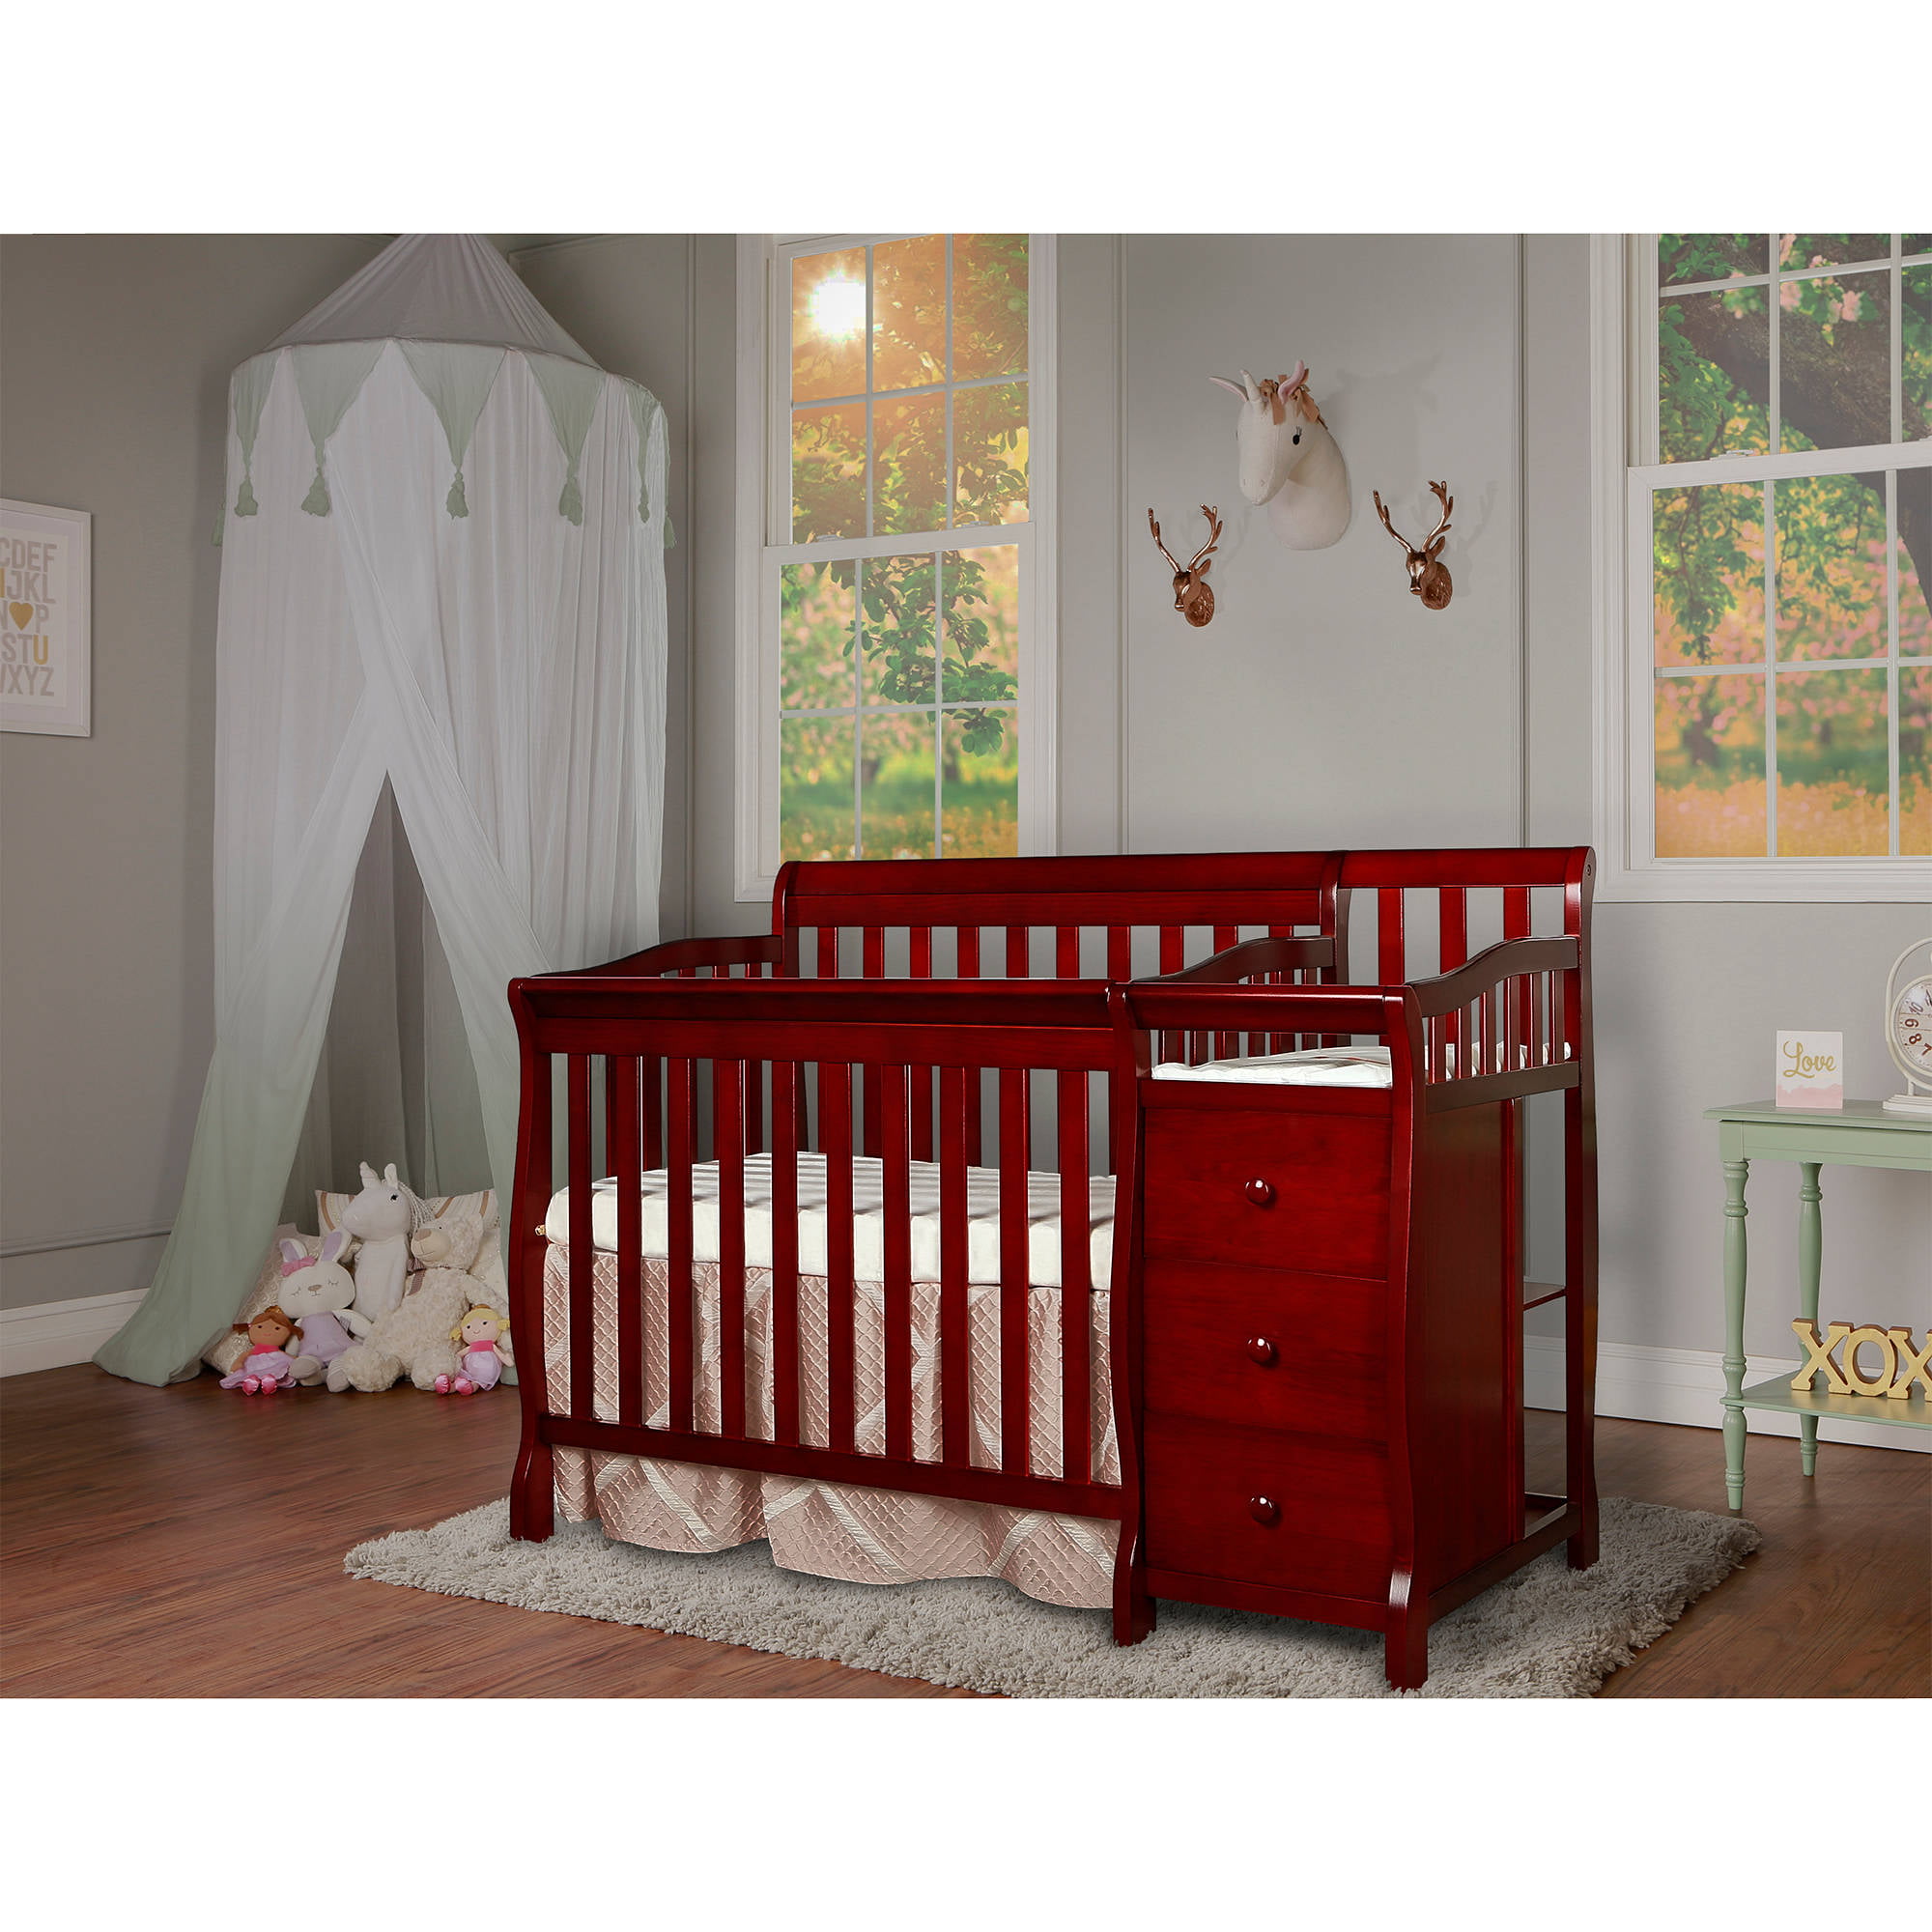 Dream On Me Jayden 4 In 1 Convertible Mini Crib And Changer Cherry